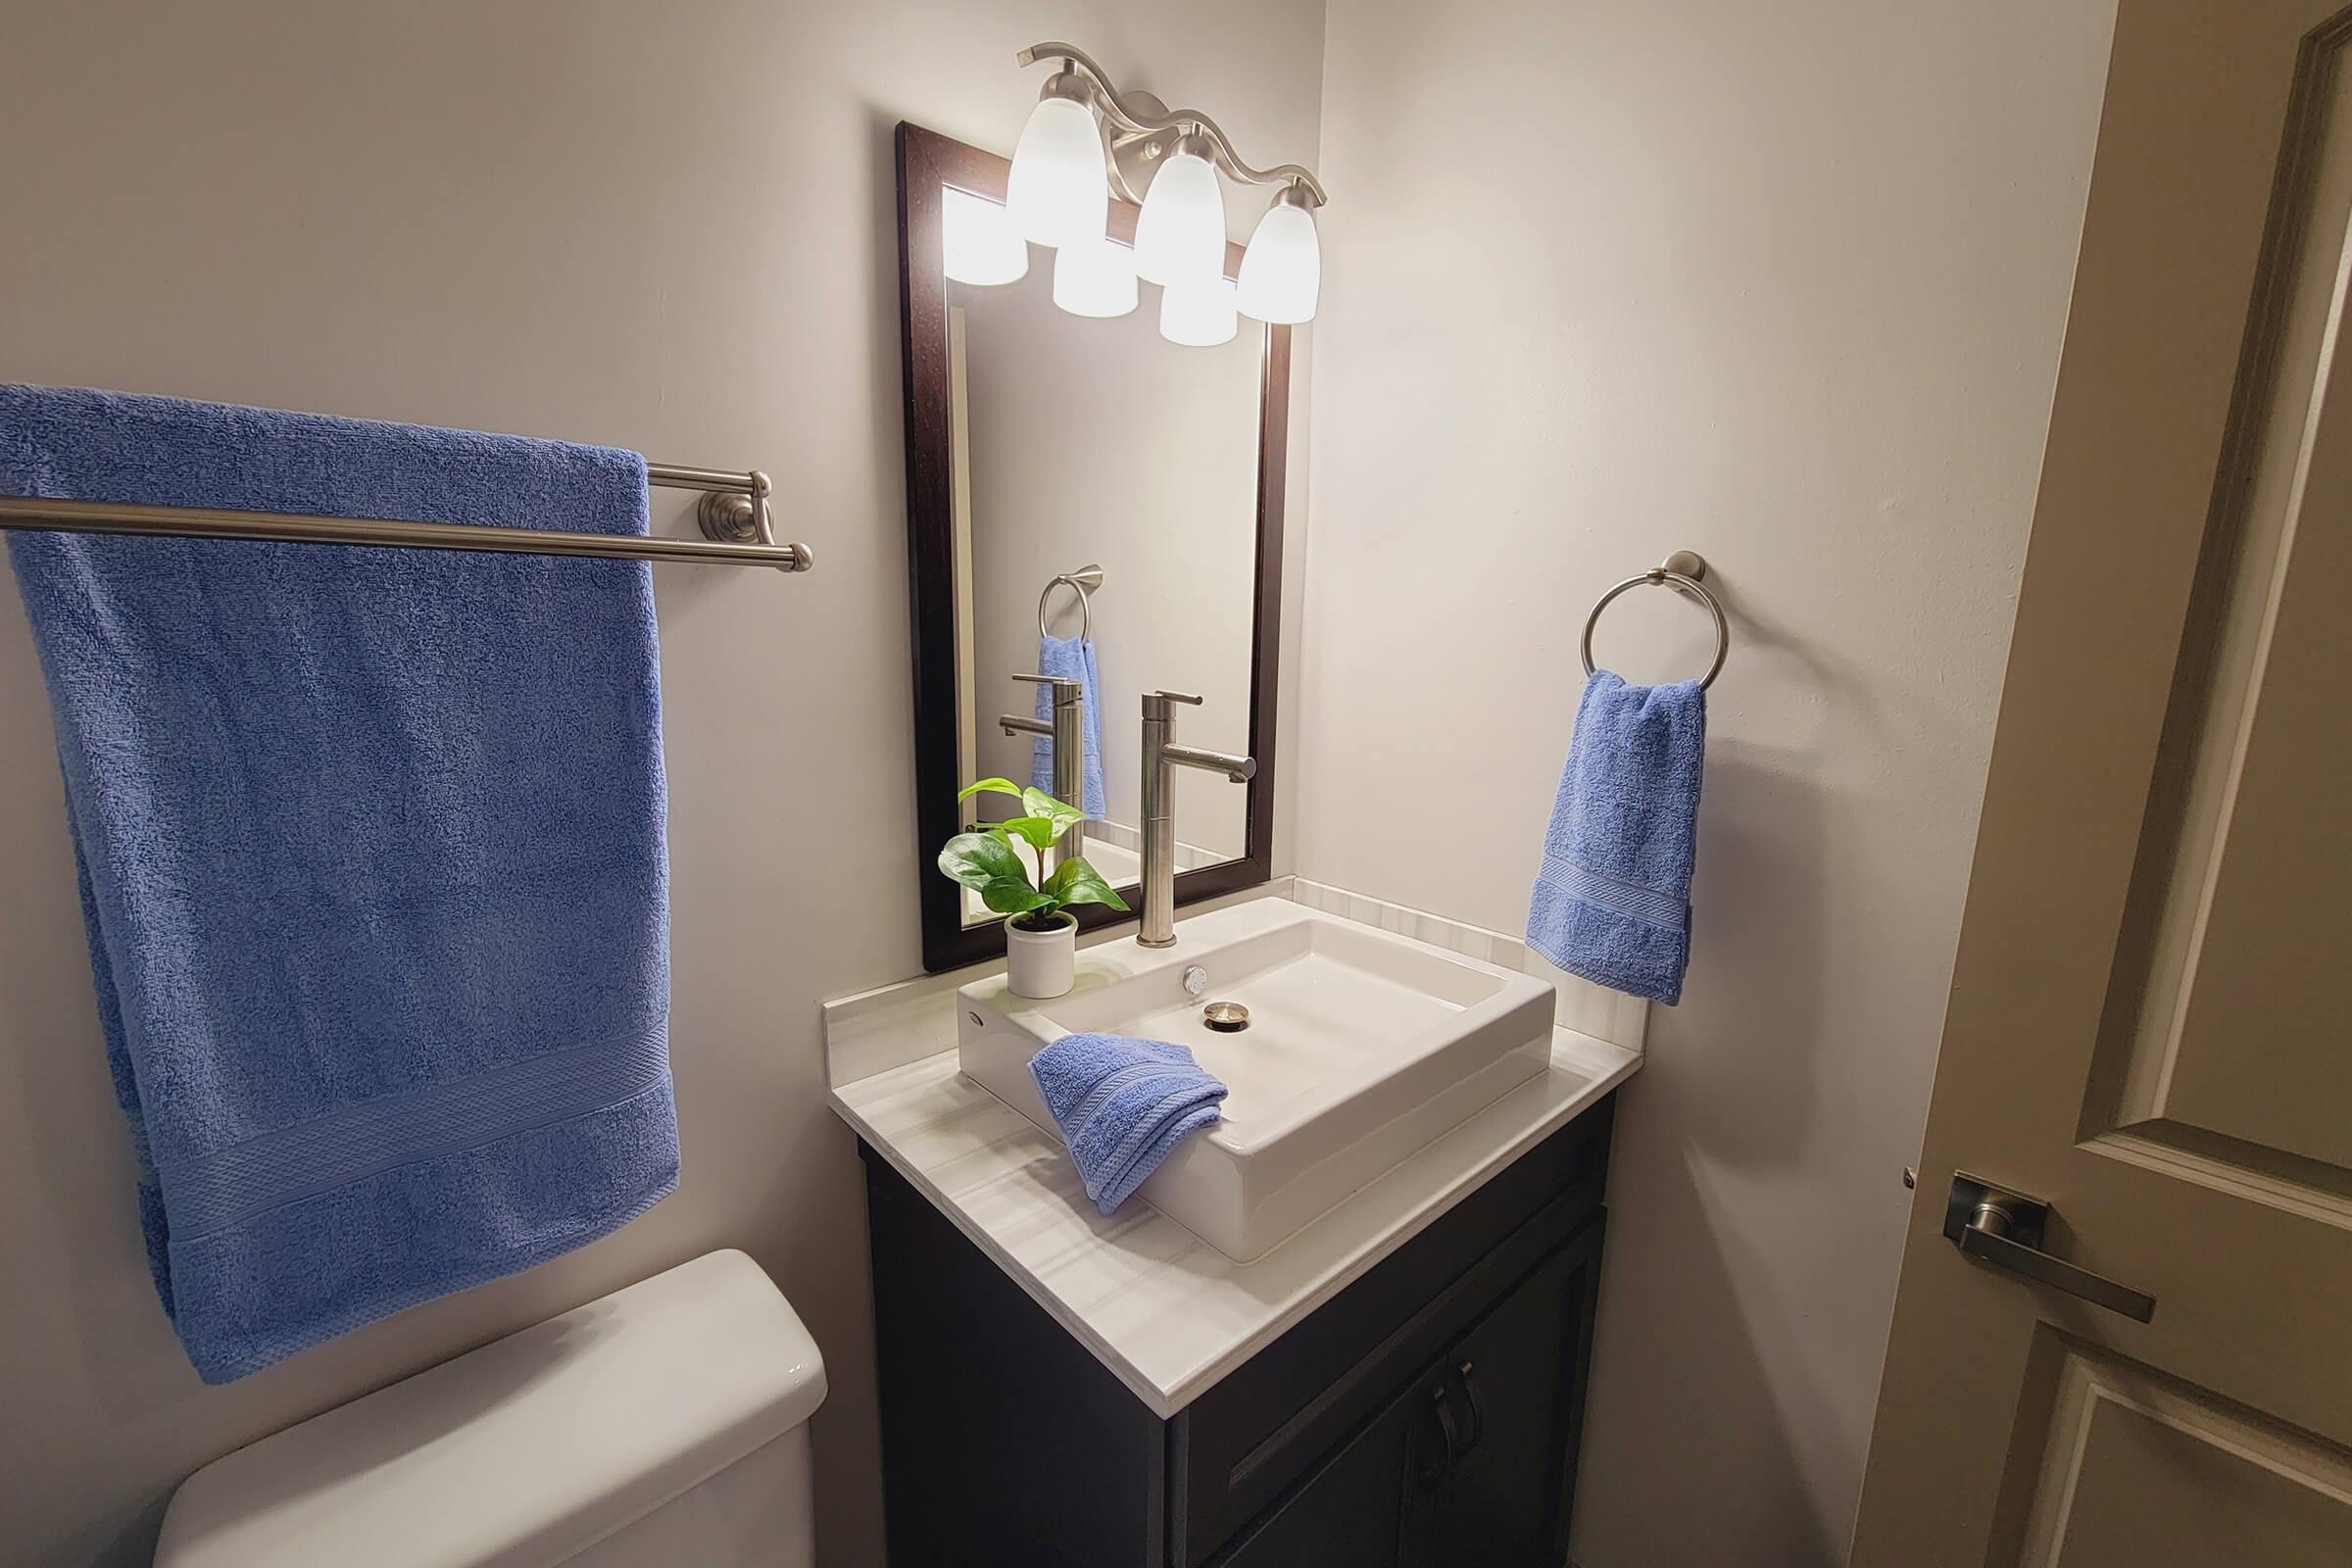 a bathroom with sink and towel bars